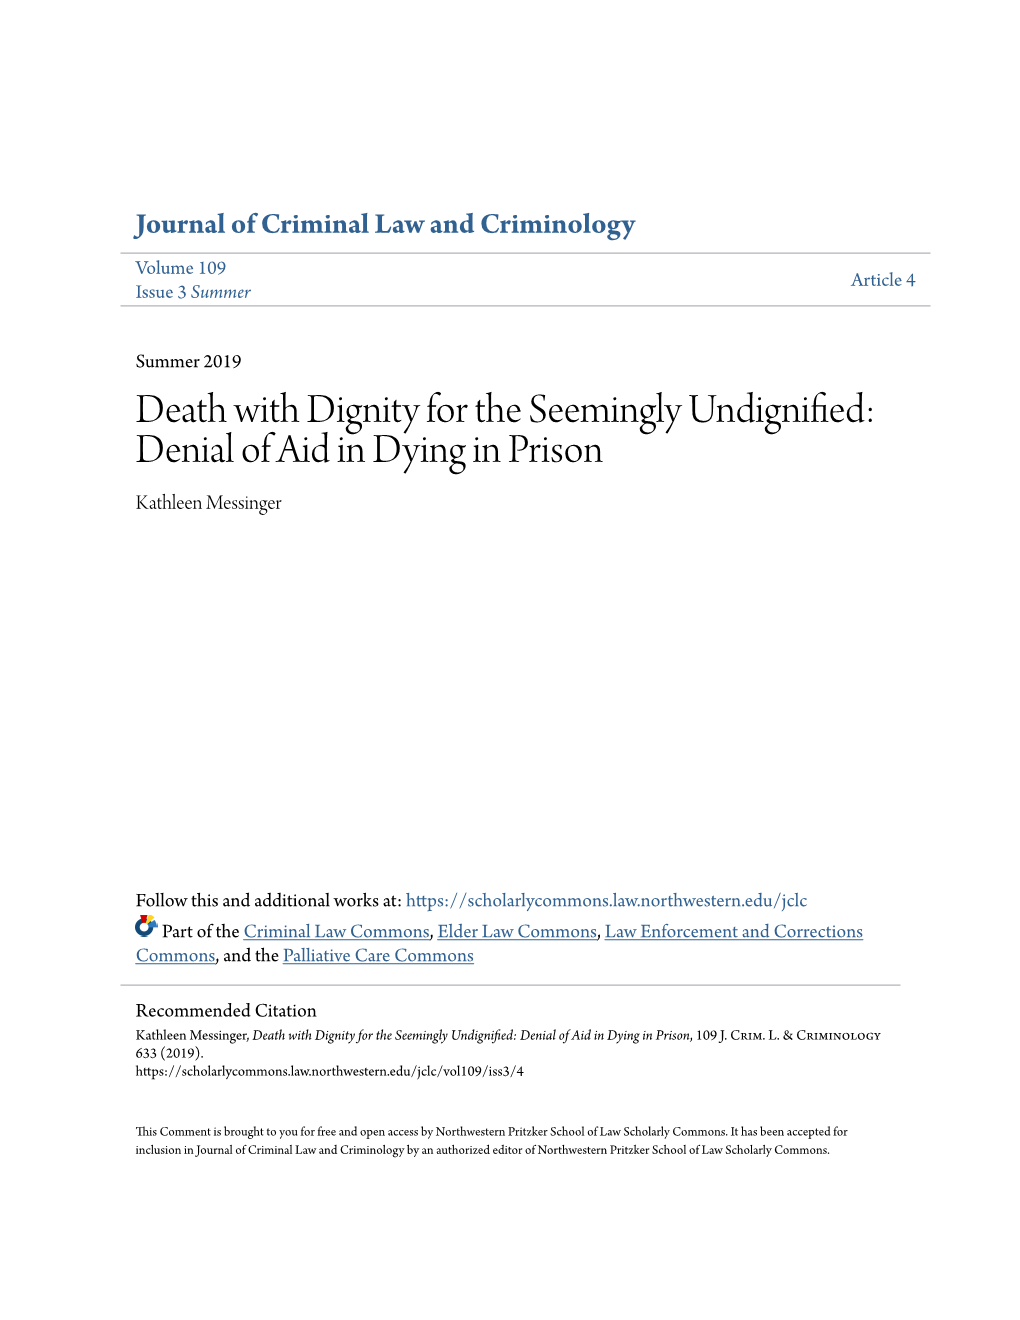 Death with Dignity for the Seemingly Undignified: Denial of Aid in Dying in Prison Kathleen Messinger